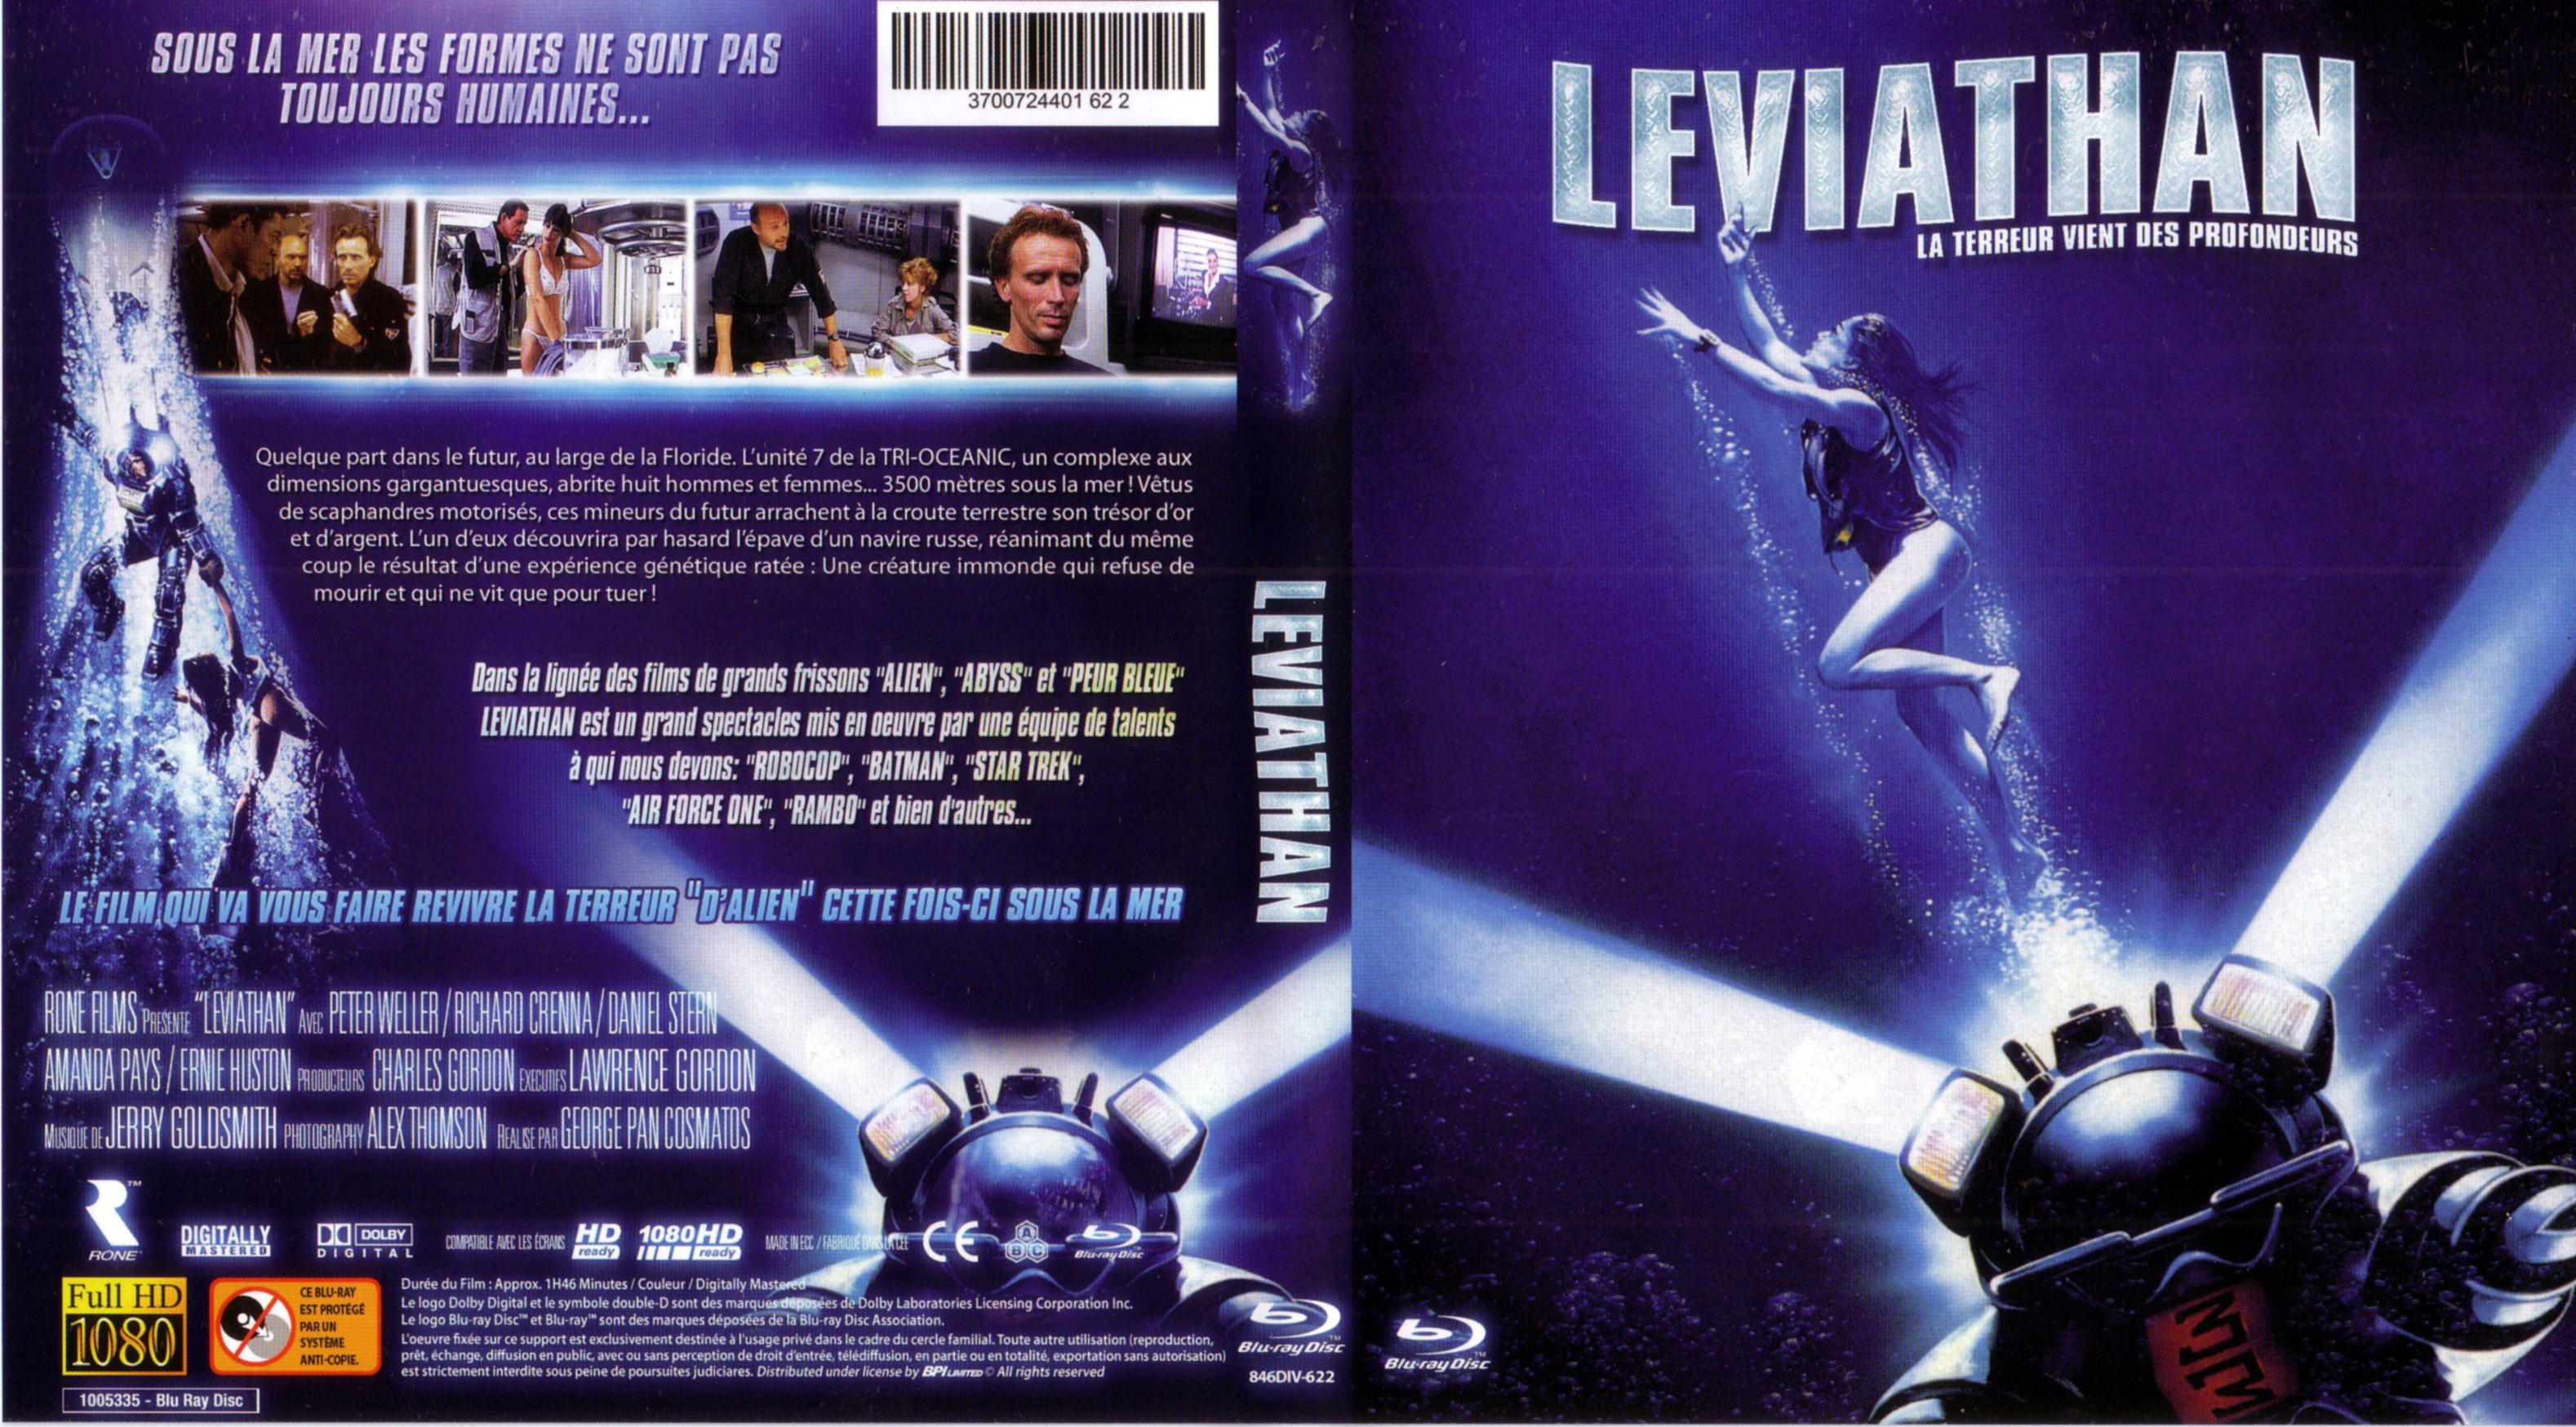 Jaquette DVD Leviathan (BLU-RAY)